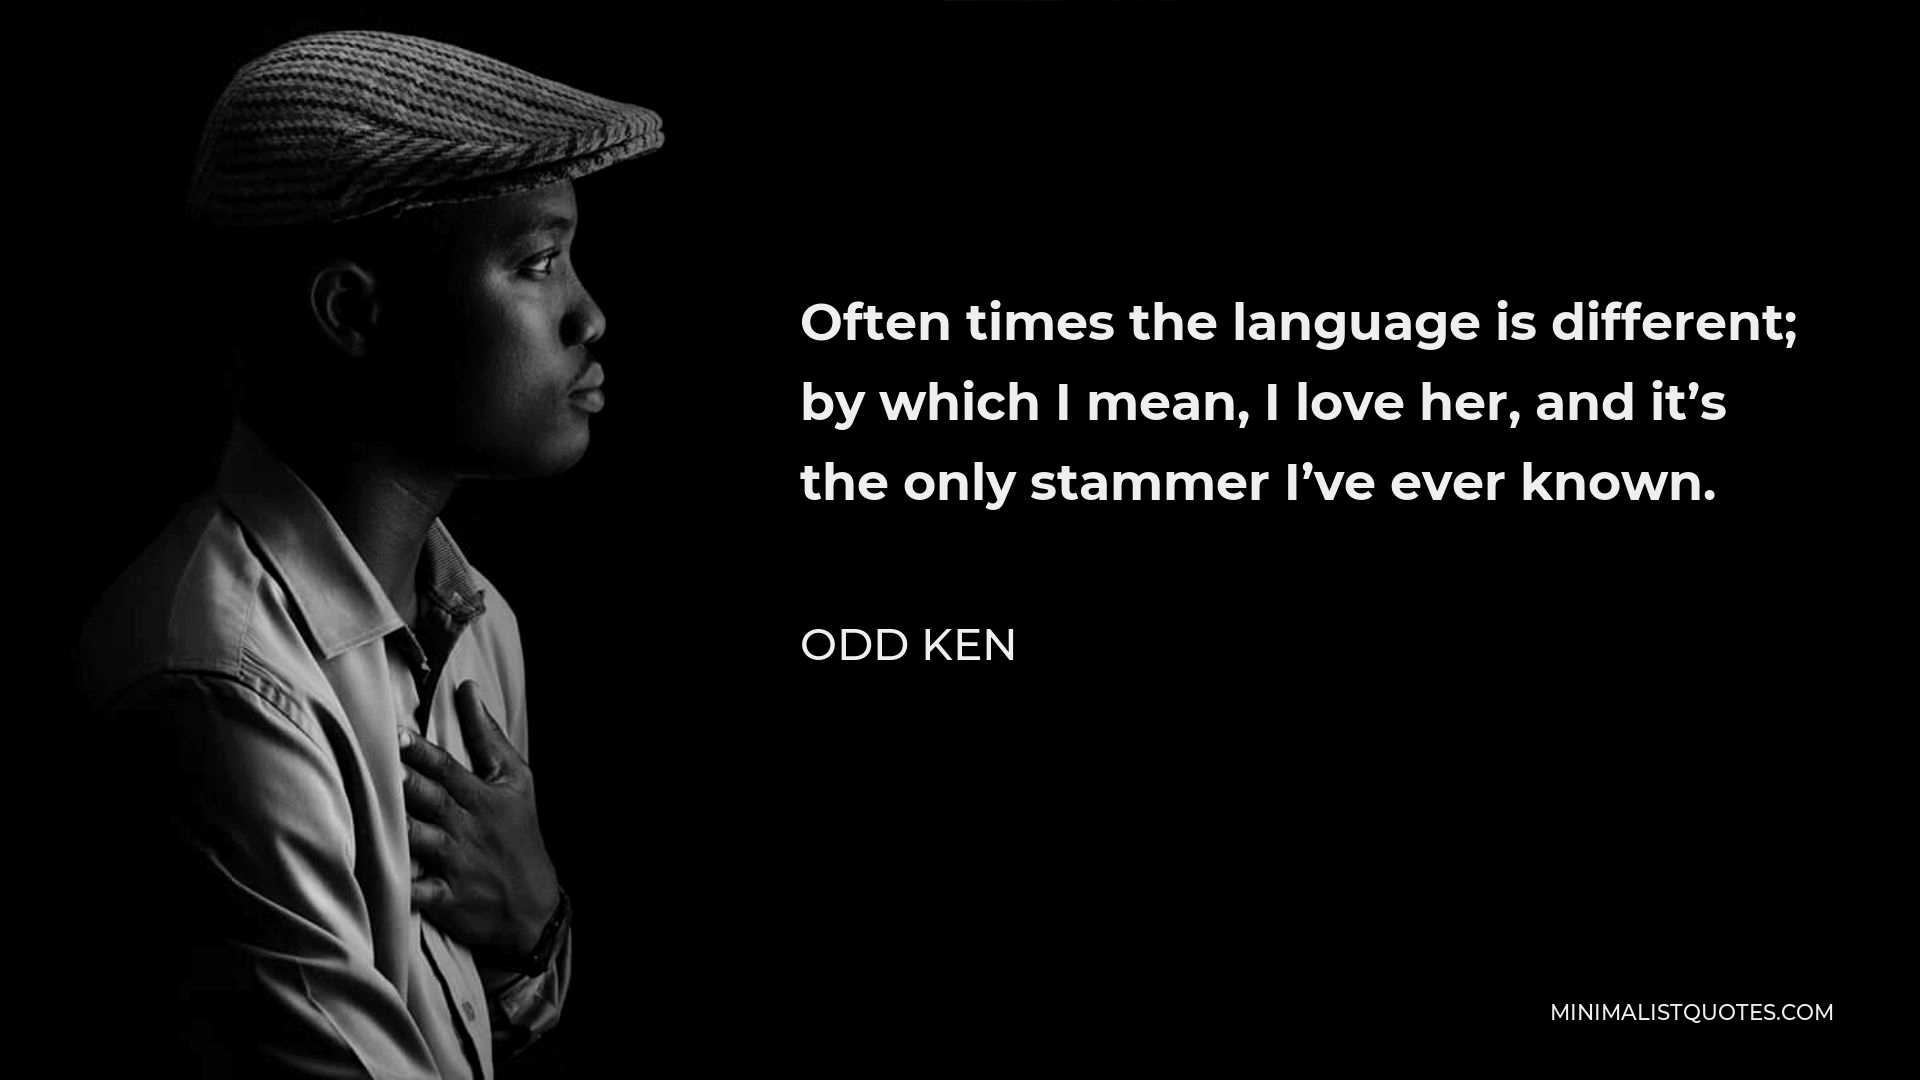 Odd Ken Quote - Often times the language is different; by which I mean, I love her, and it’s the only stammer I’ve ever known.